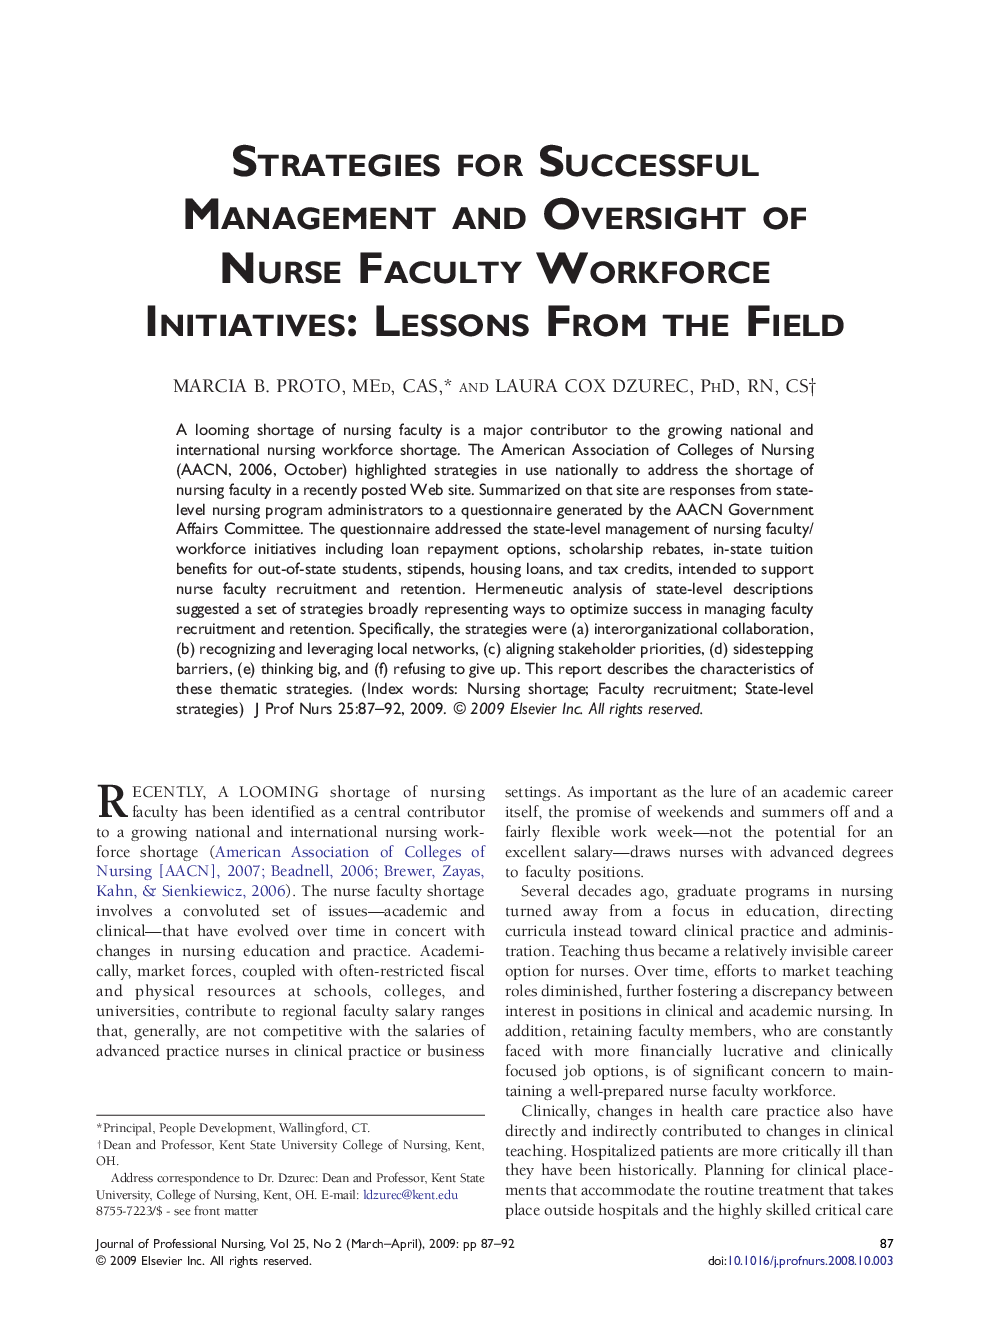 Strategies for Successful Management and Oversight of Nurse Faculty Workforce Initiatives: Lessons From the Field